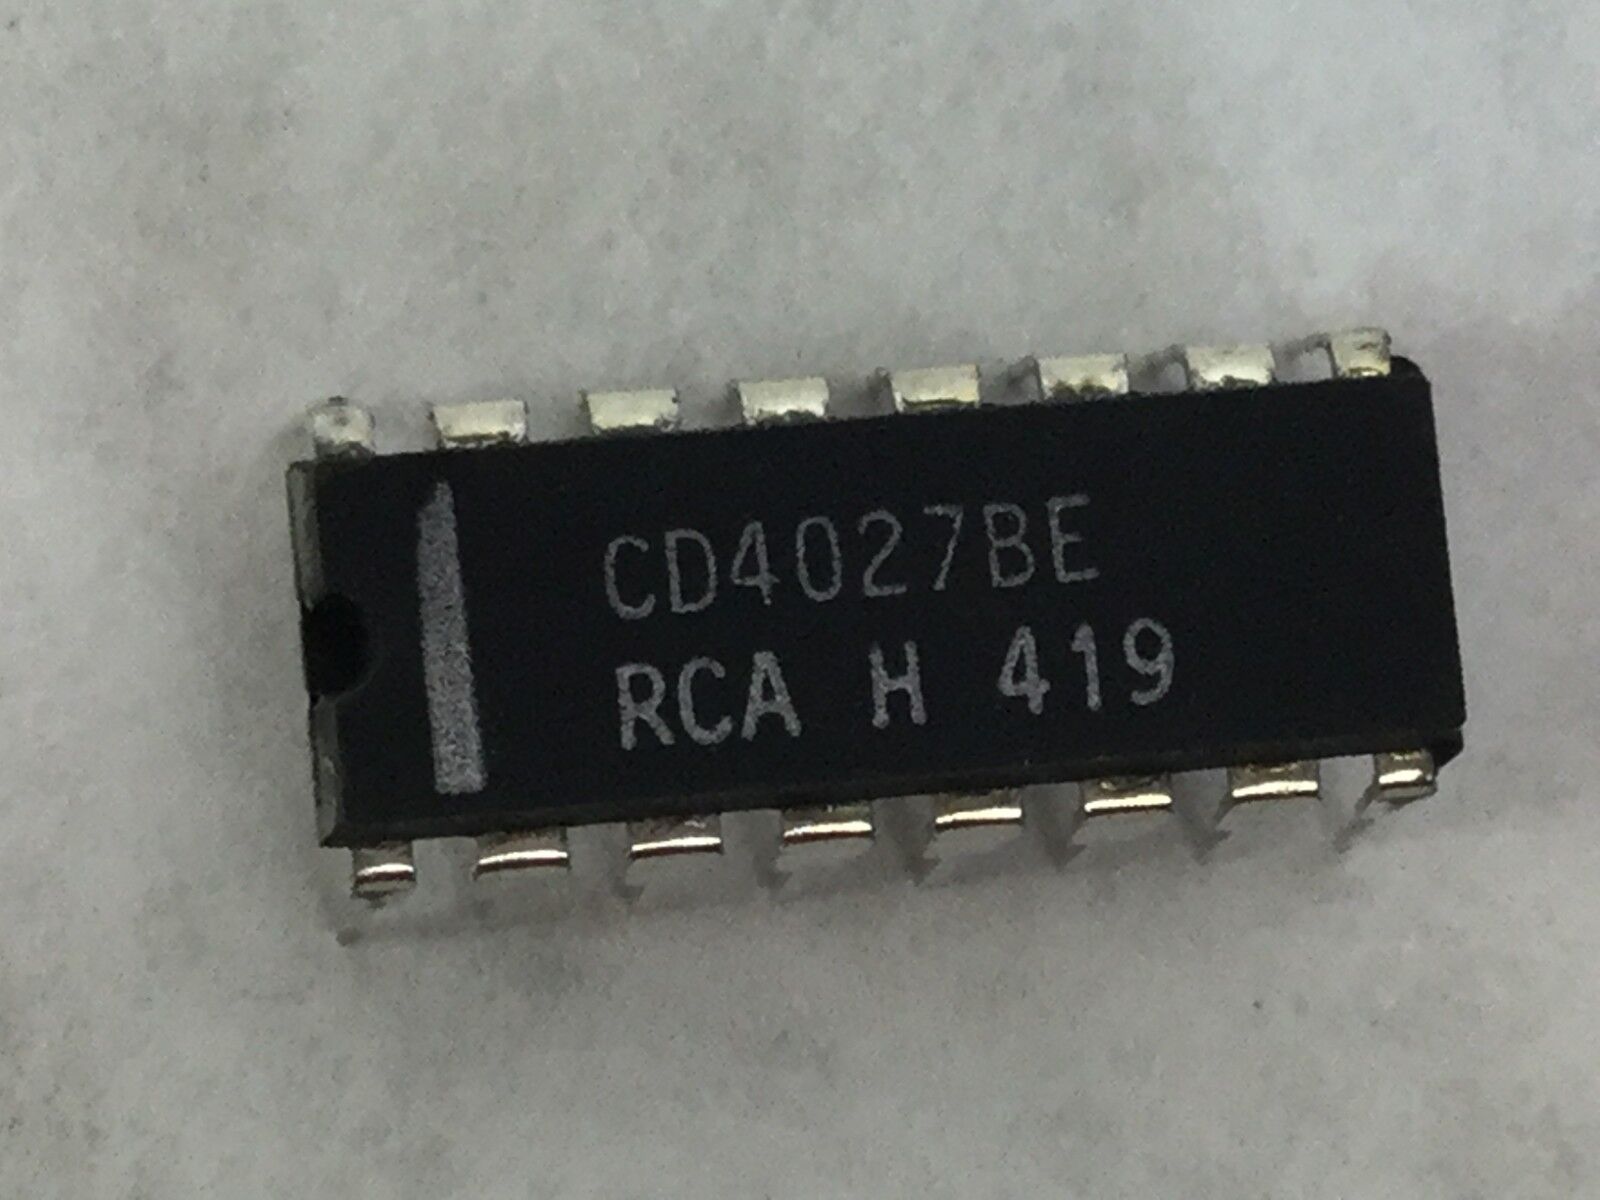 Genuine RCA CD4027BE  Integrated Circuit  16 Pin  Lot of 23